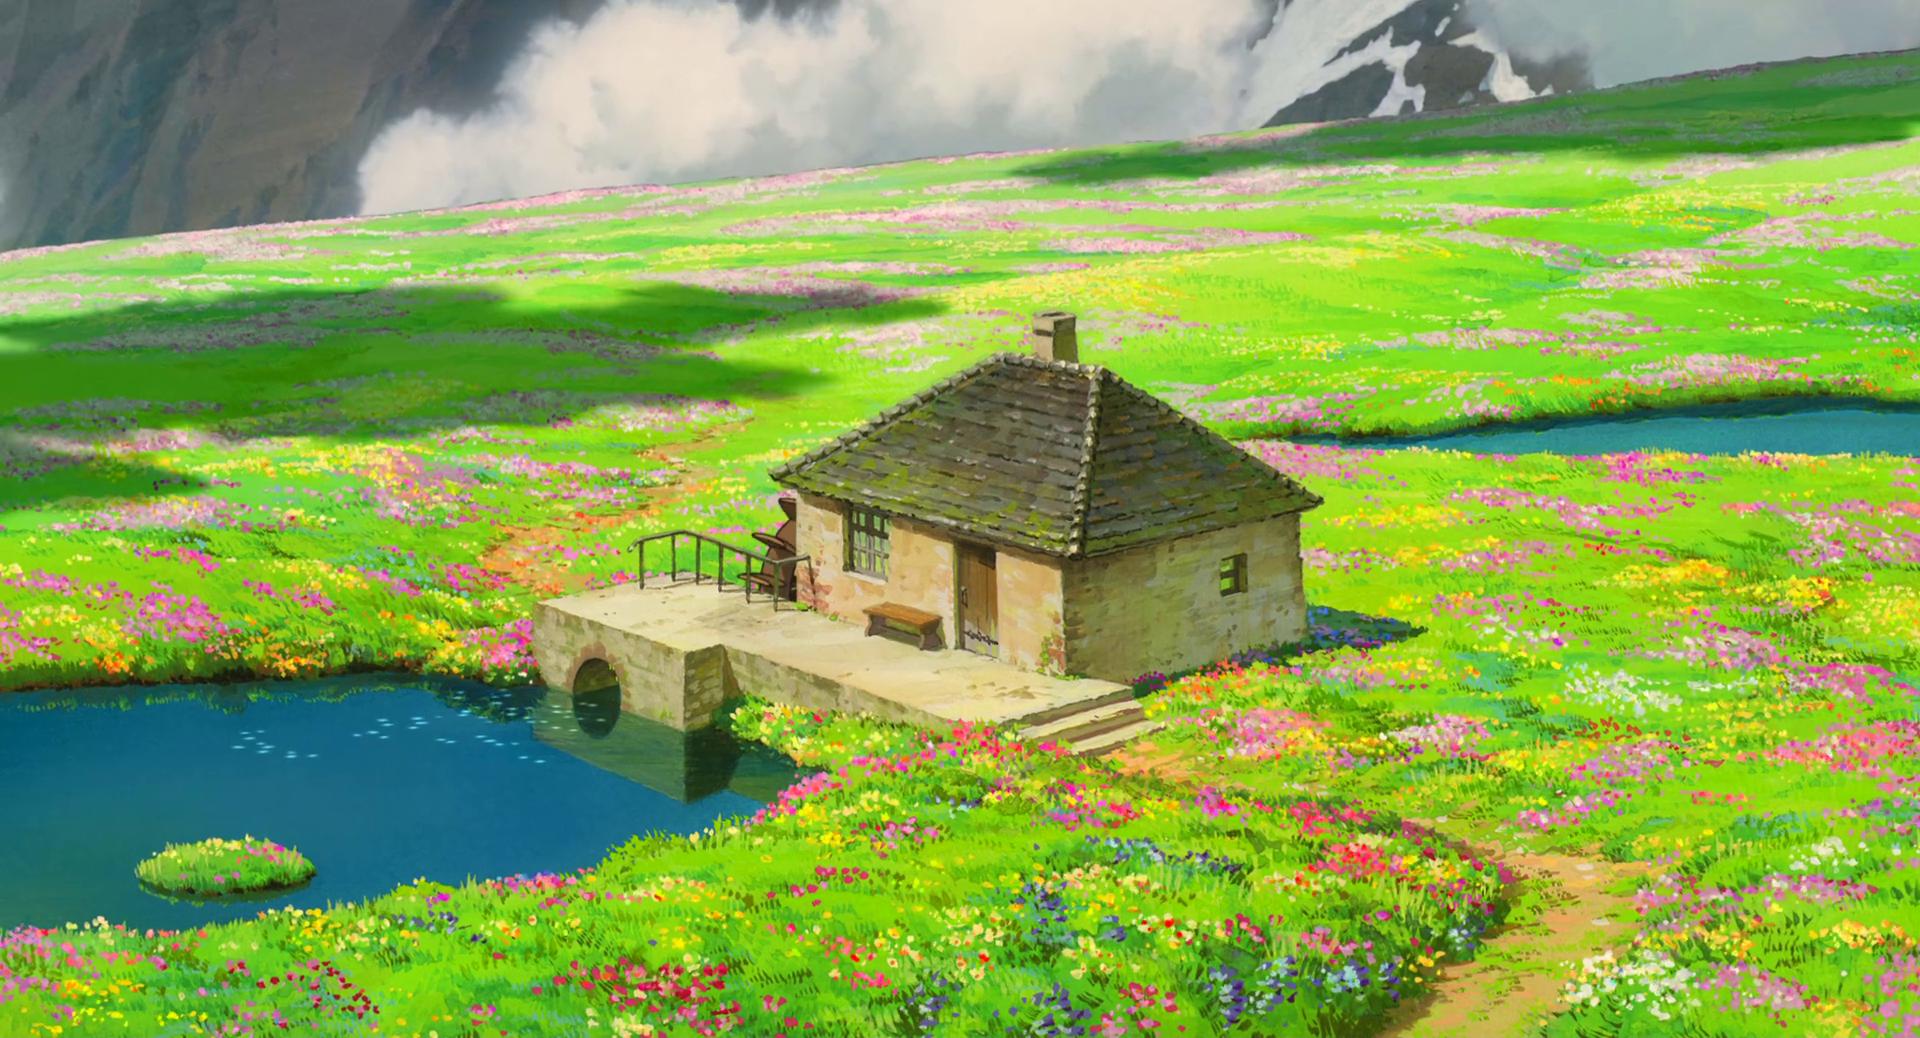 The Timeless Beauty Of Studio Ghibli’s Movies